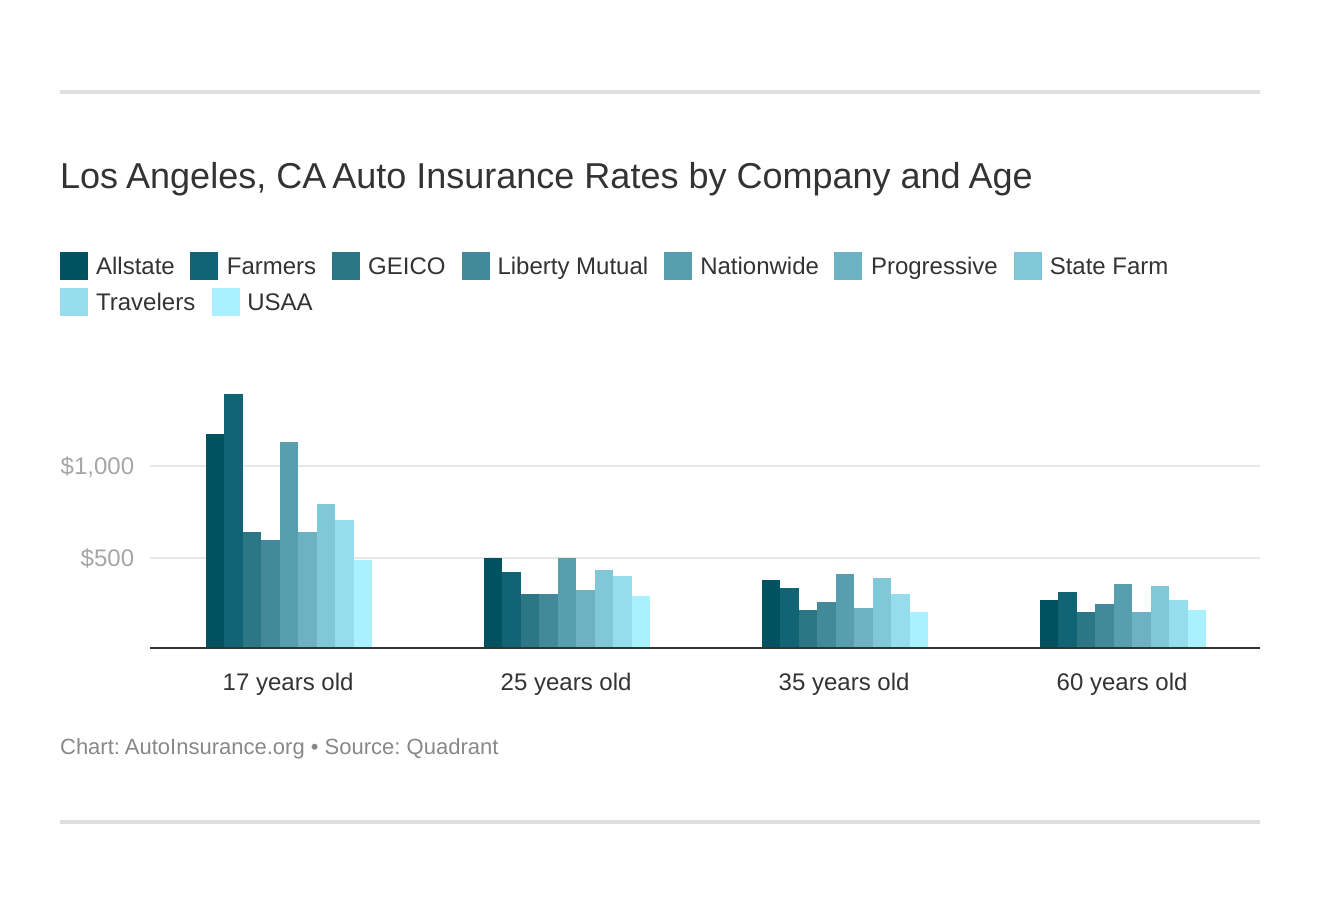 Los Angeles, CA Auto Insurance Rates by Company and Age